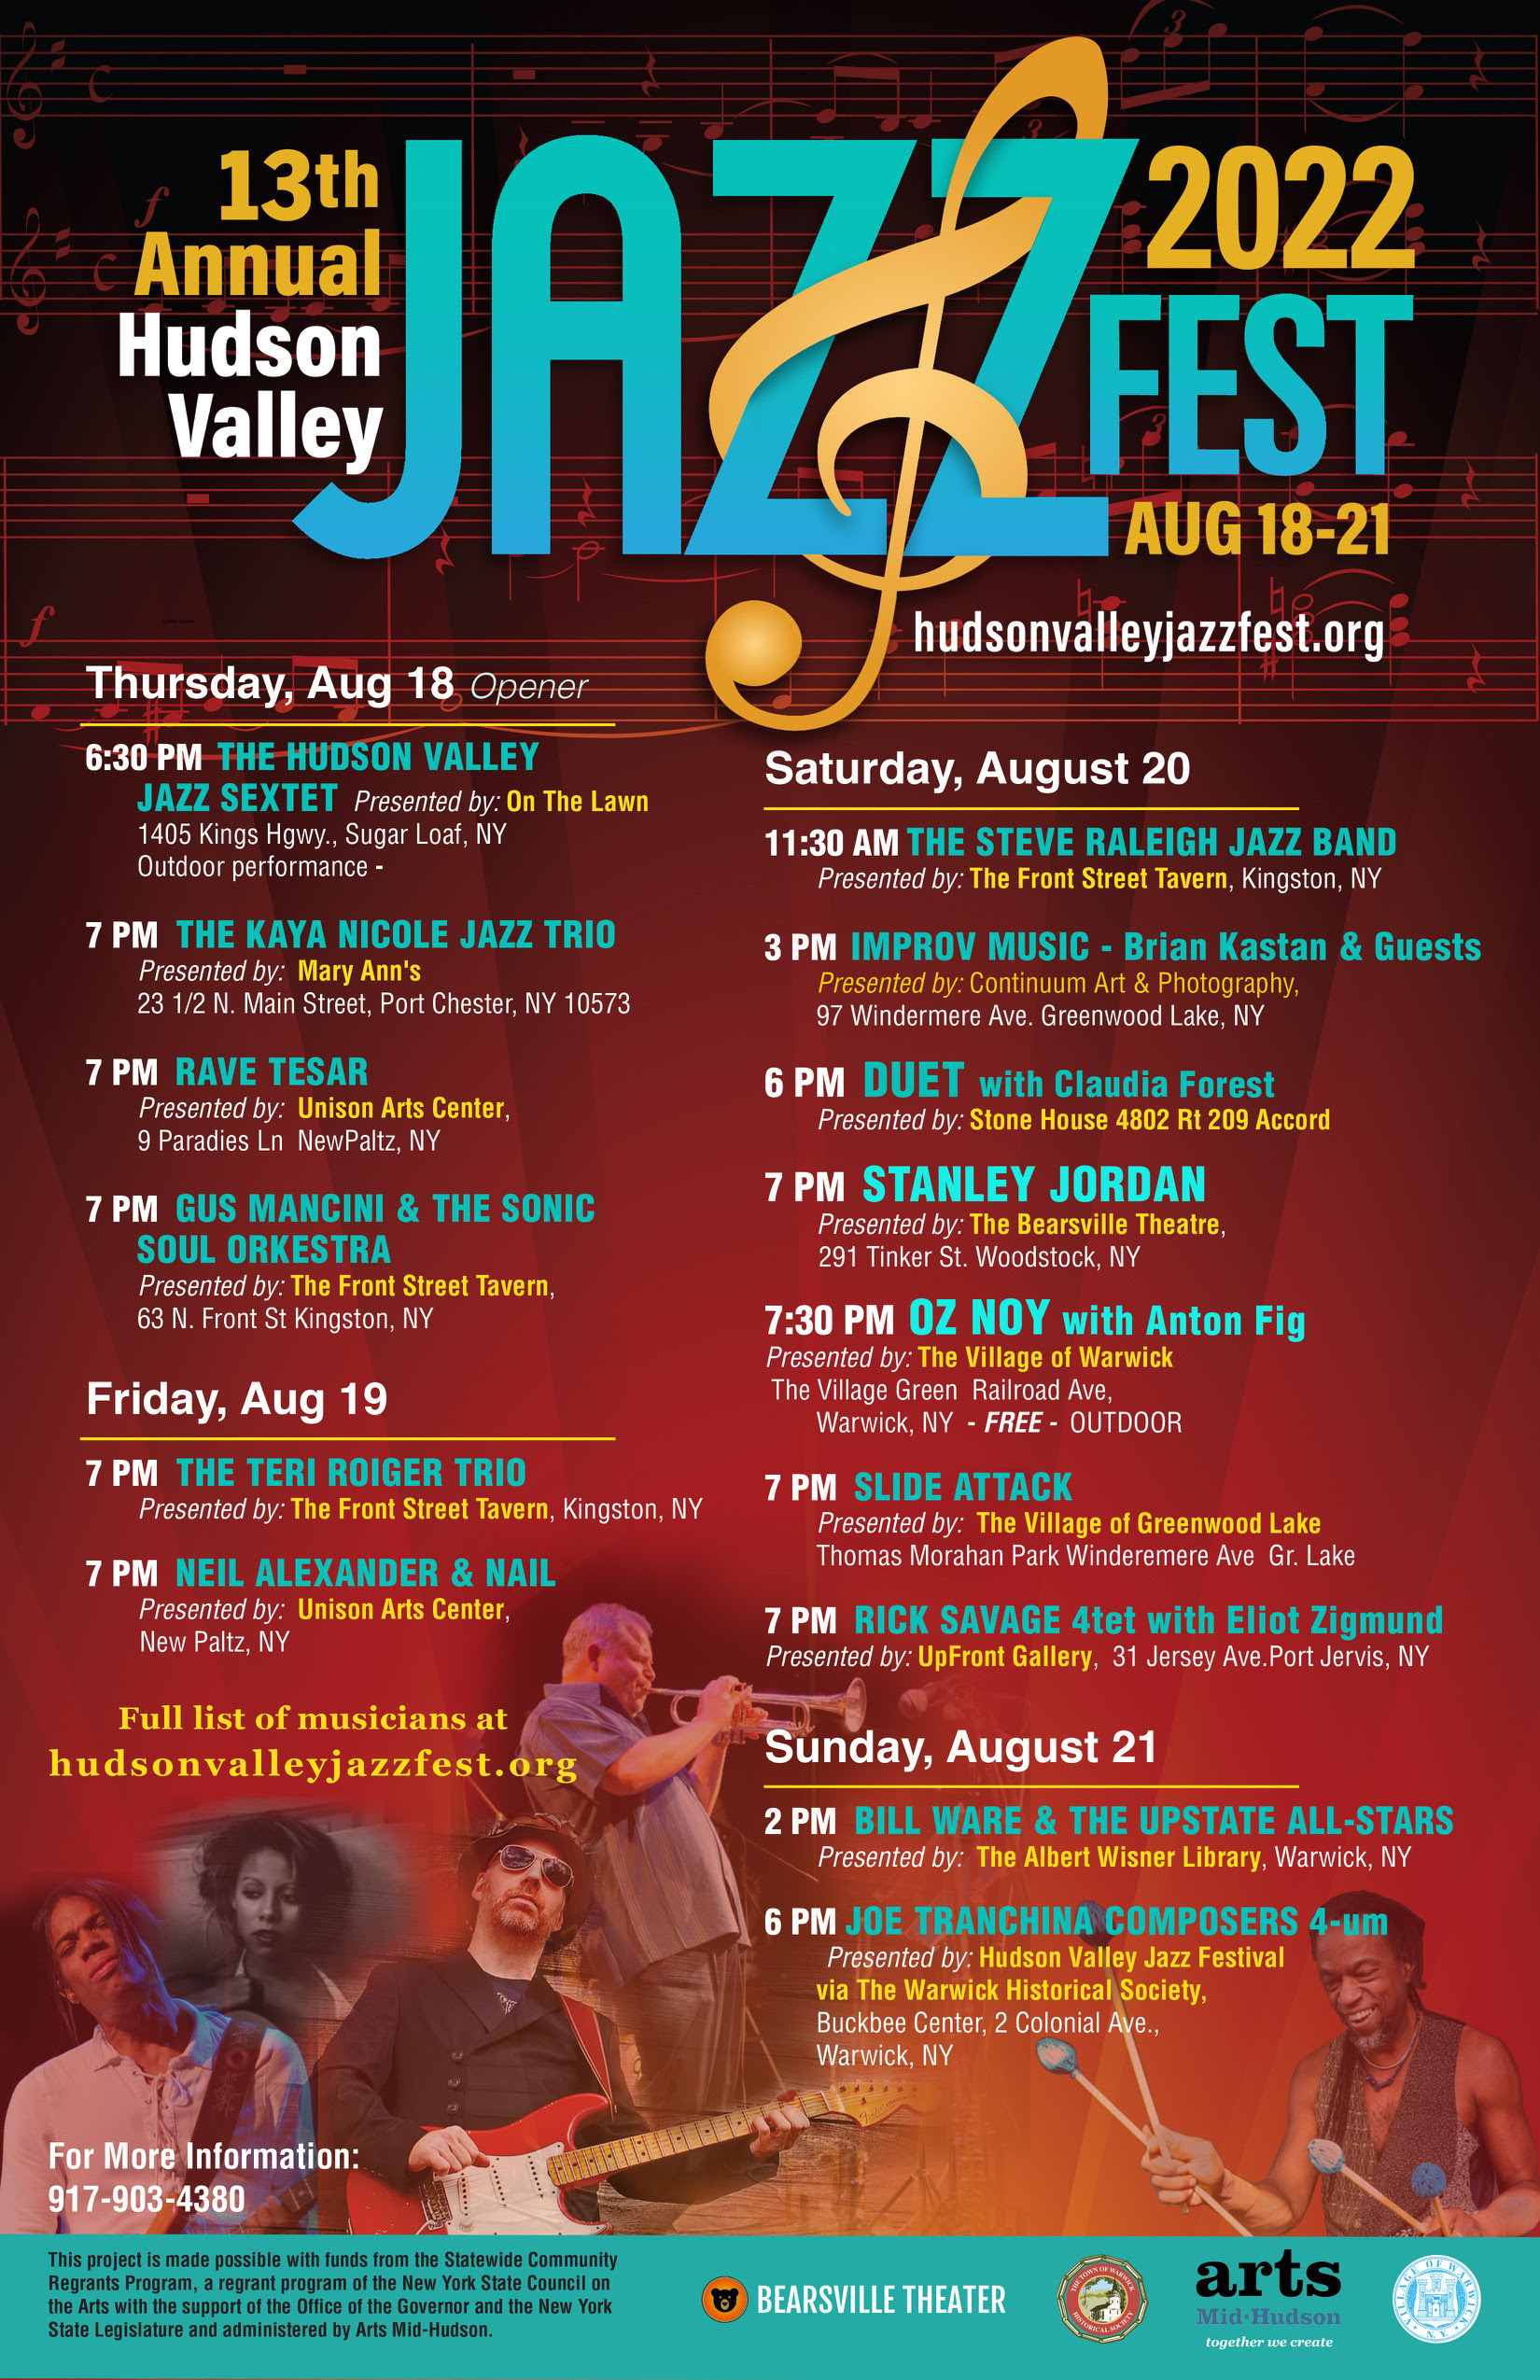 13th Annual Hudson Valley Jazz Festival August 18-21, 2022